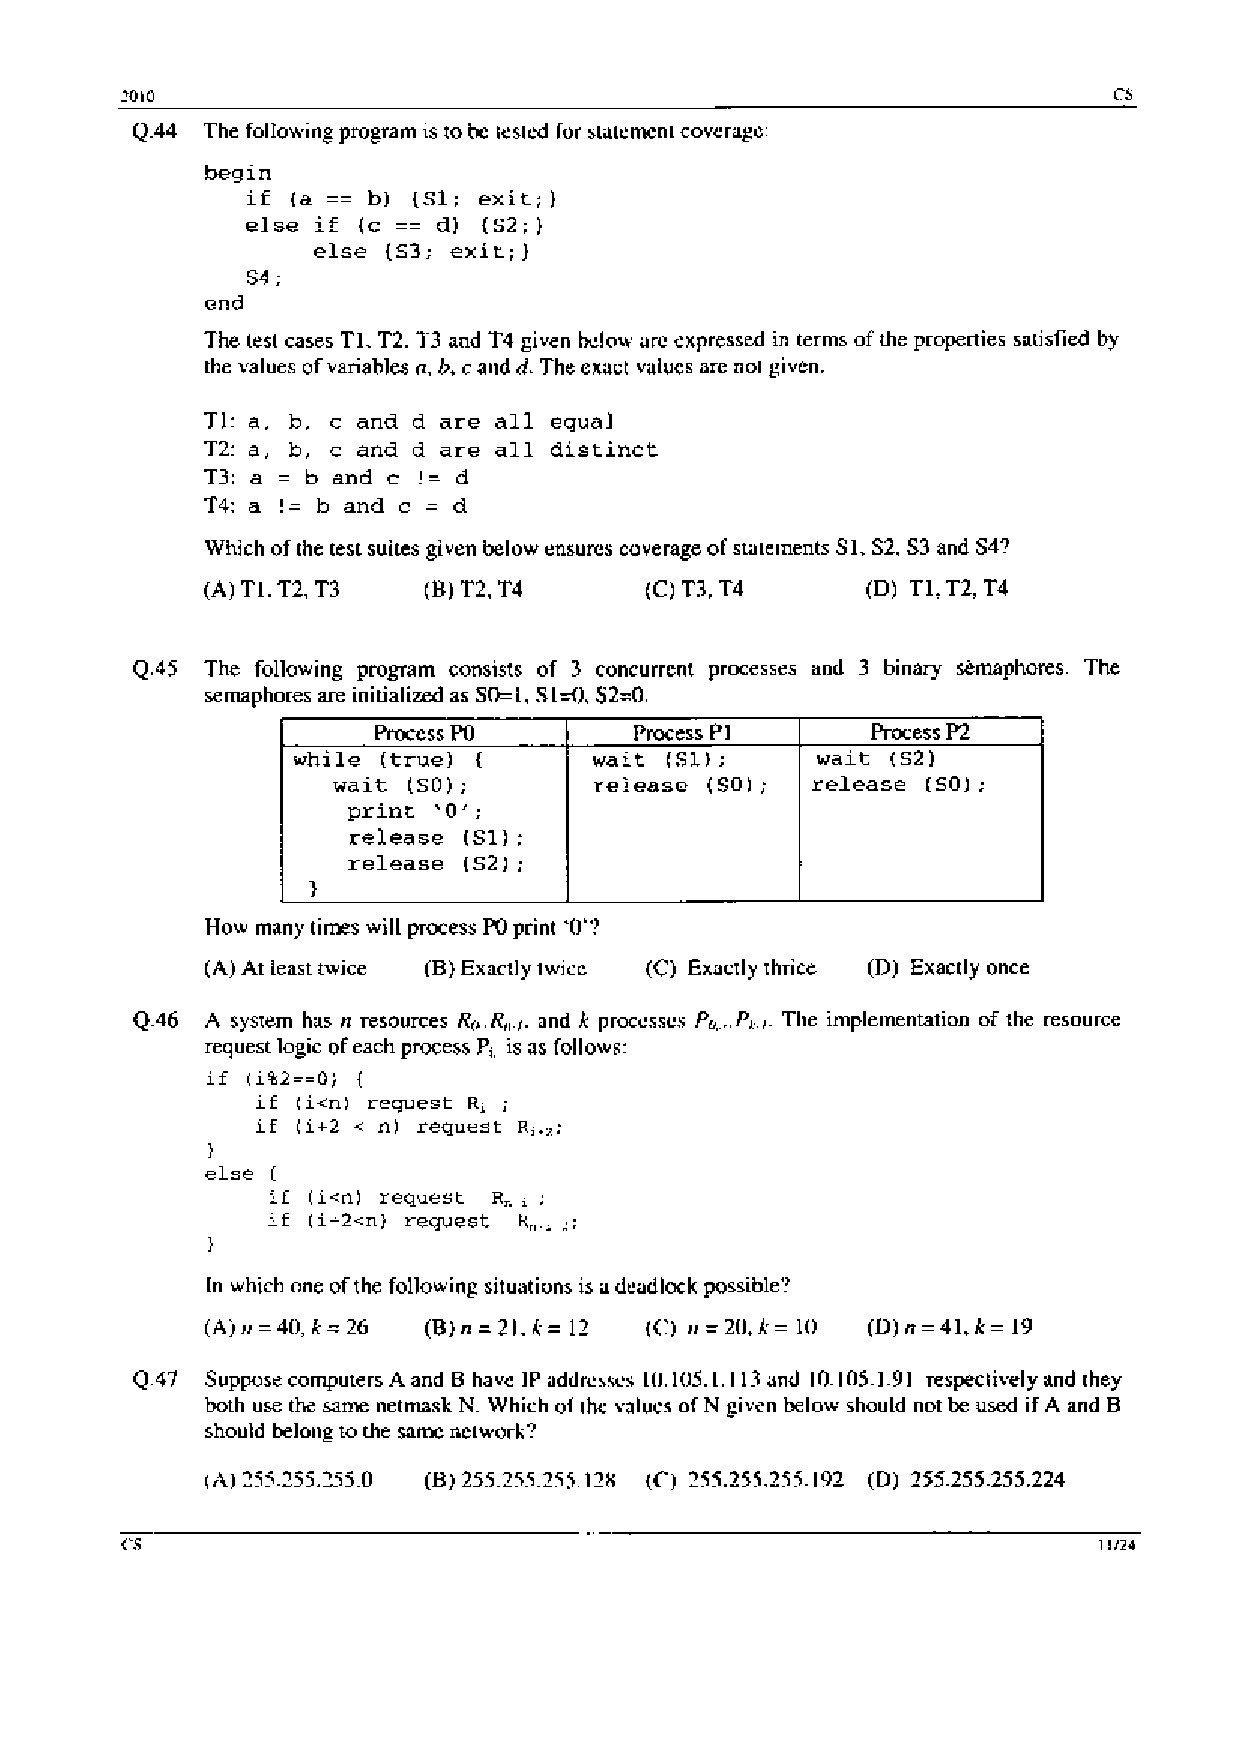 GATE Exam Question Paper 2010 Computer Science and Information Technology 11